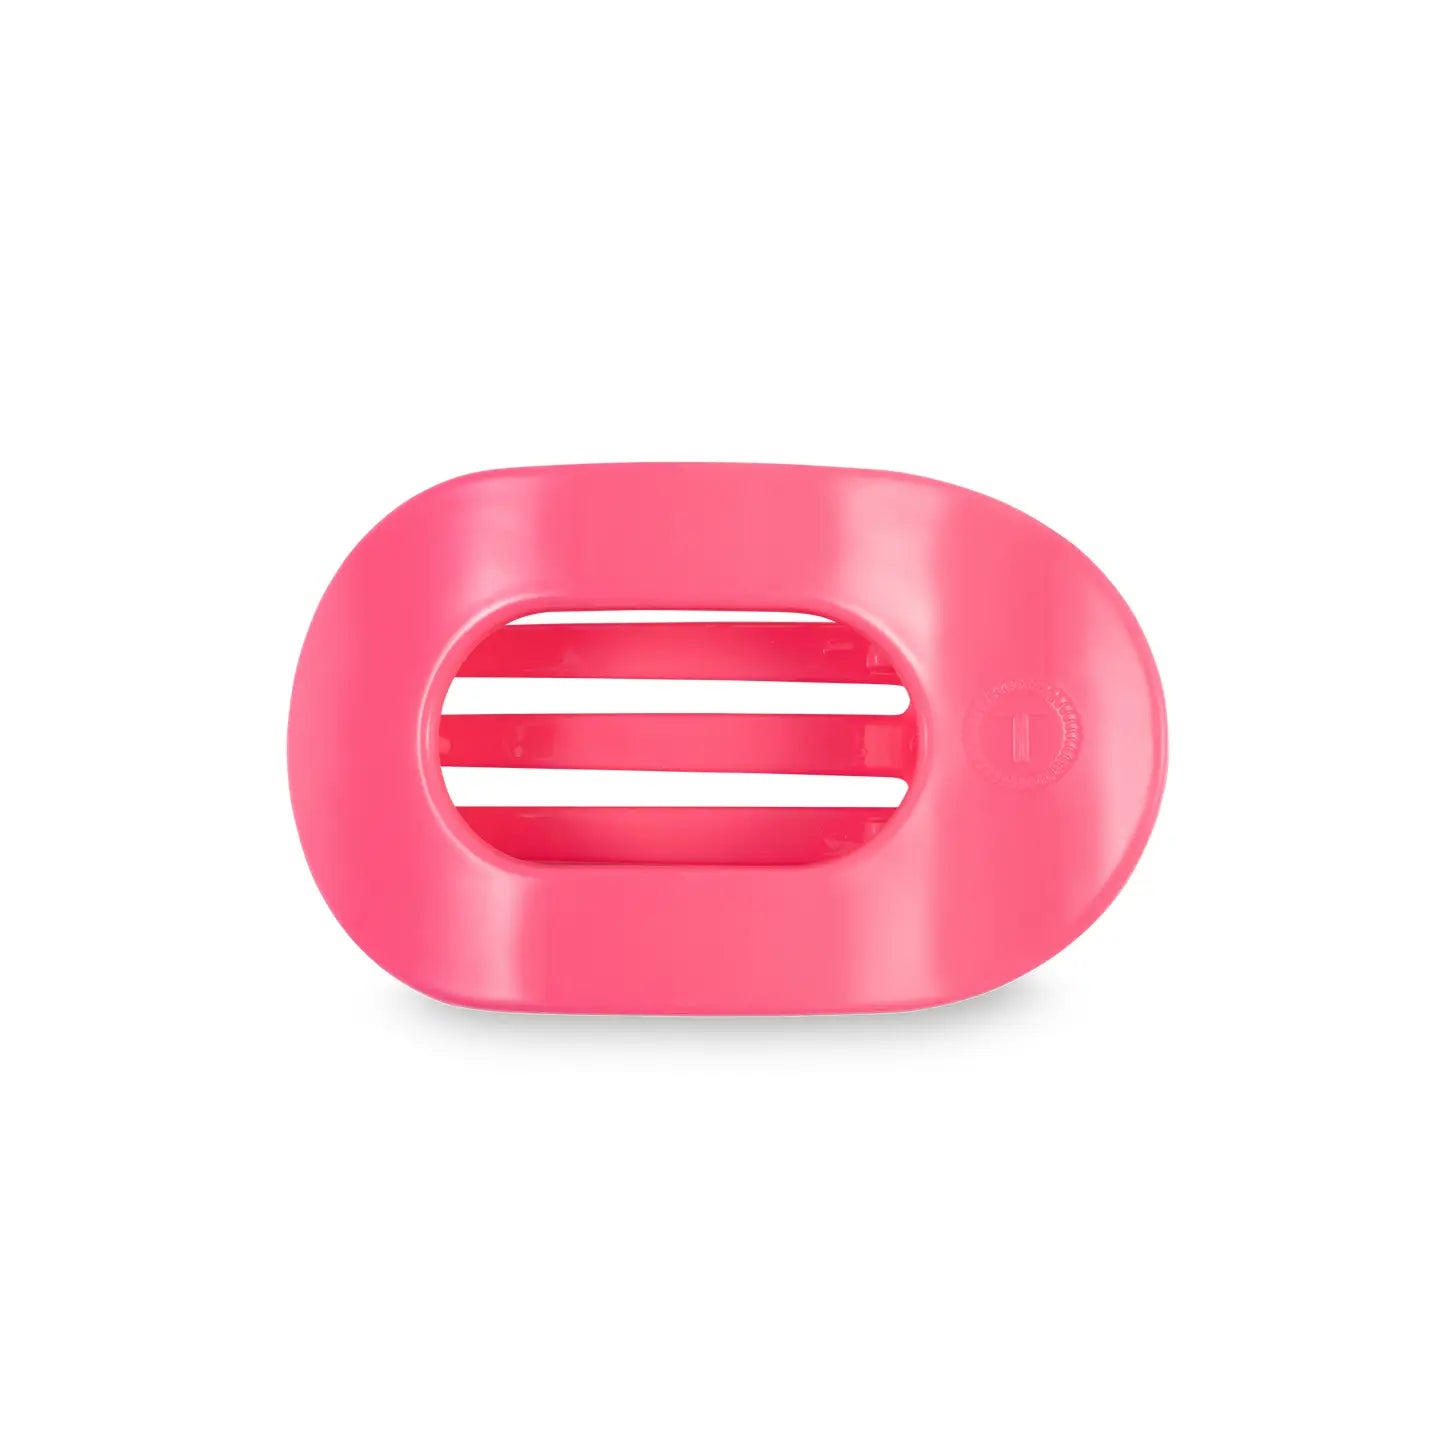 small flat round hair clip in a bright pink color